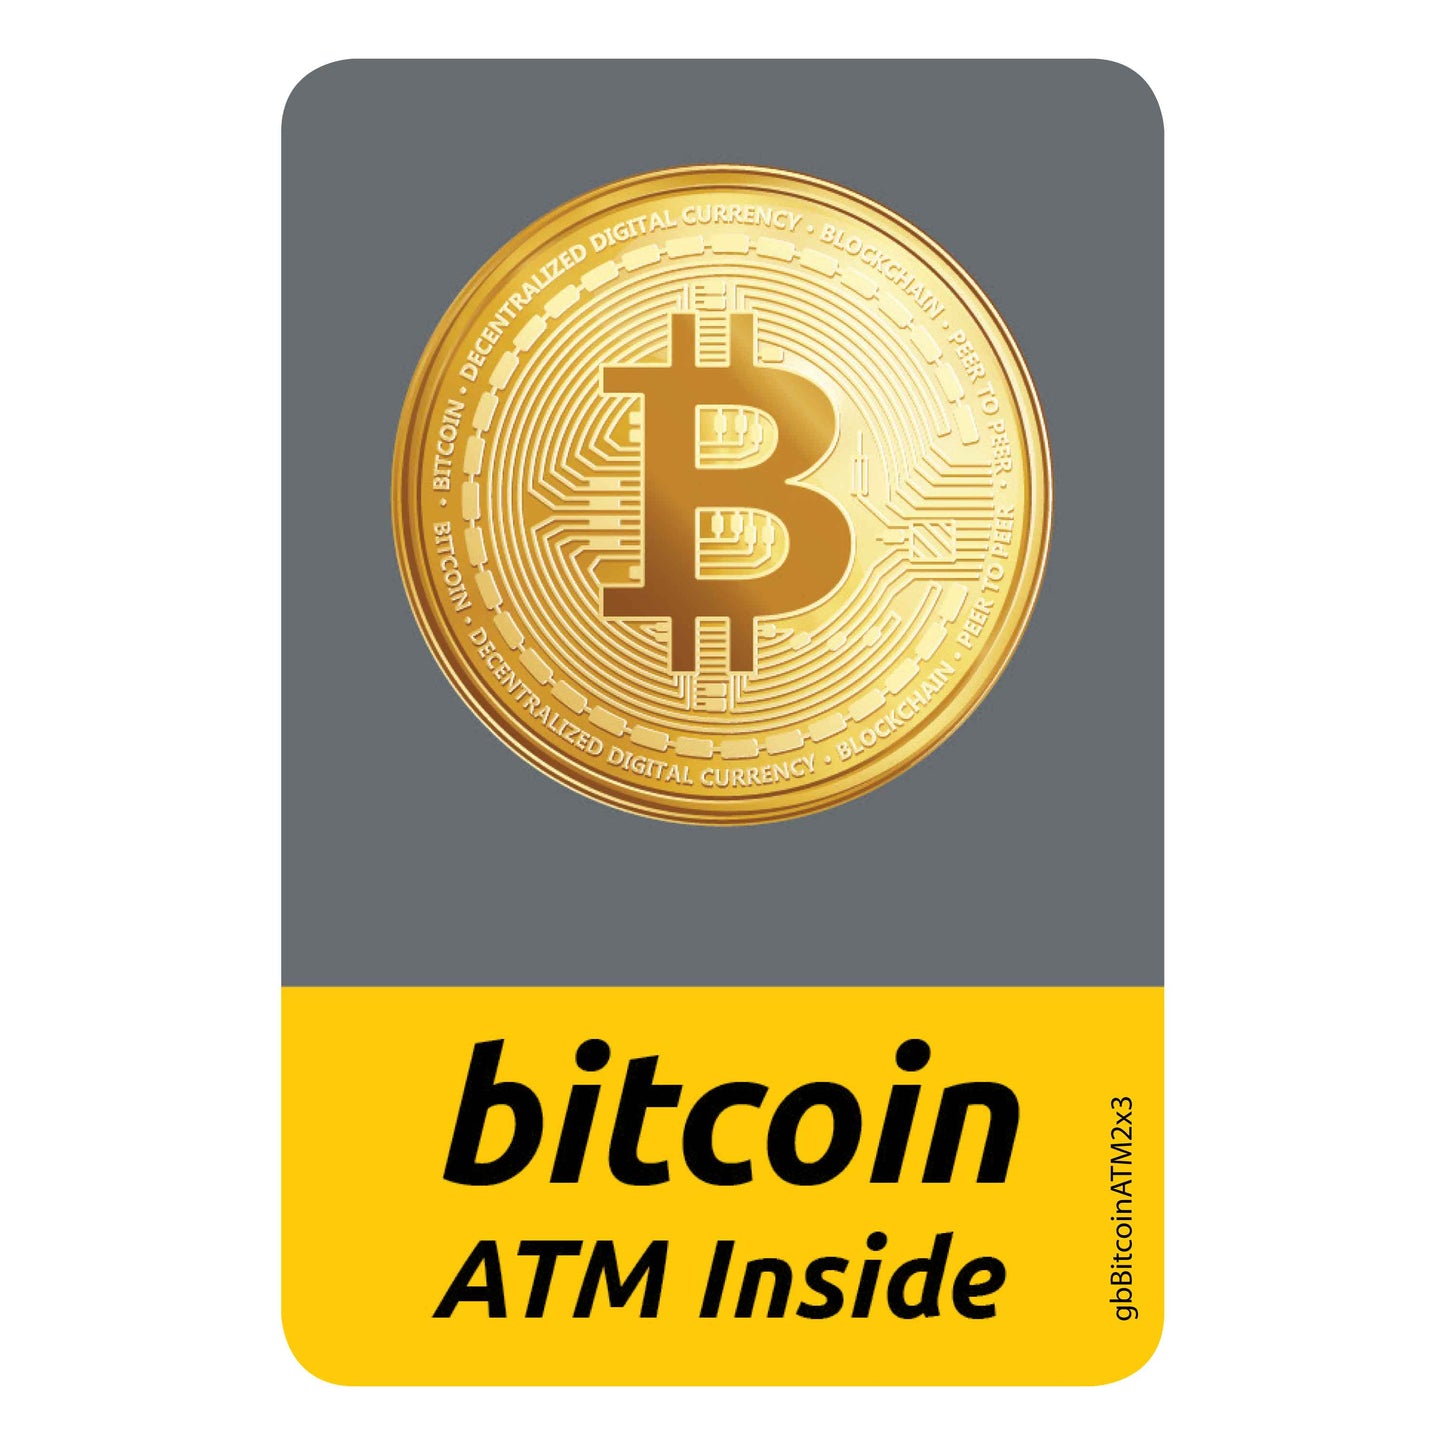 Bitcoin ATM Inside Decal. 2 inches by 3 inches in size.